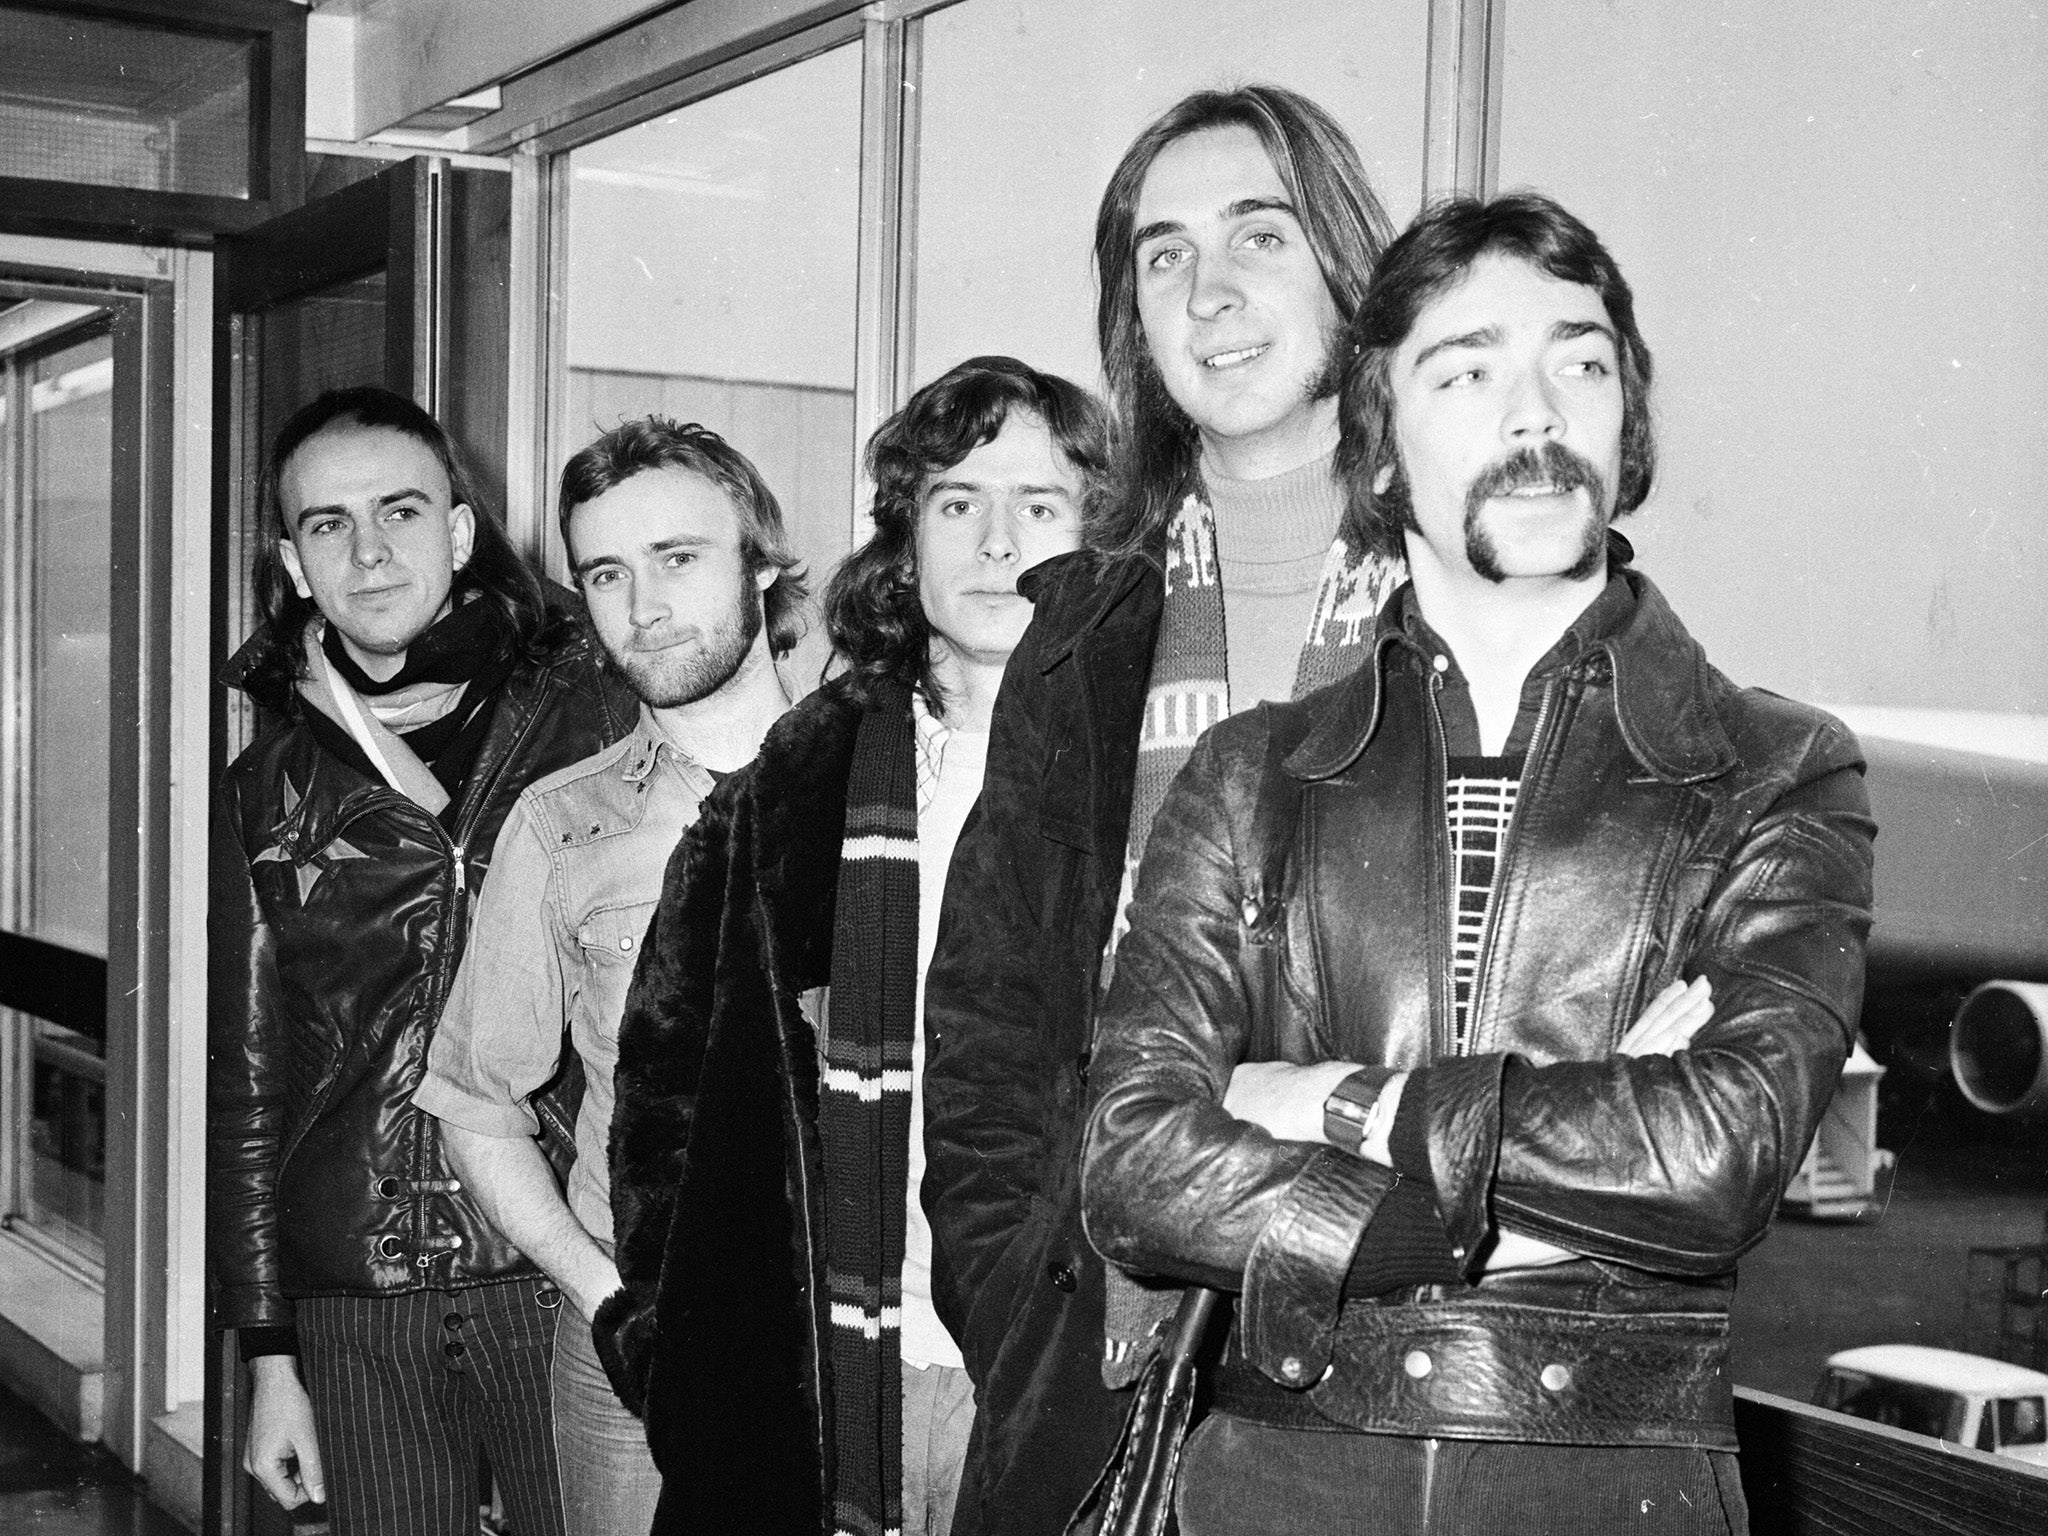 Genesis pose for a snap at London Airport in 1974